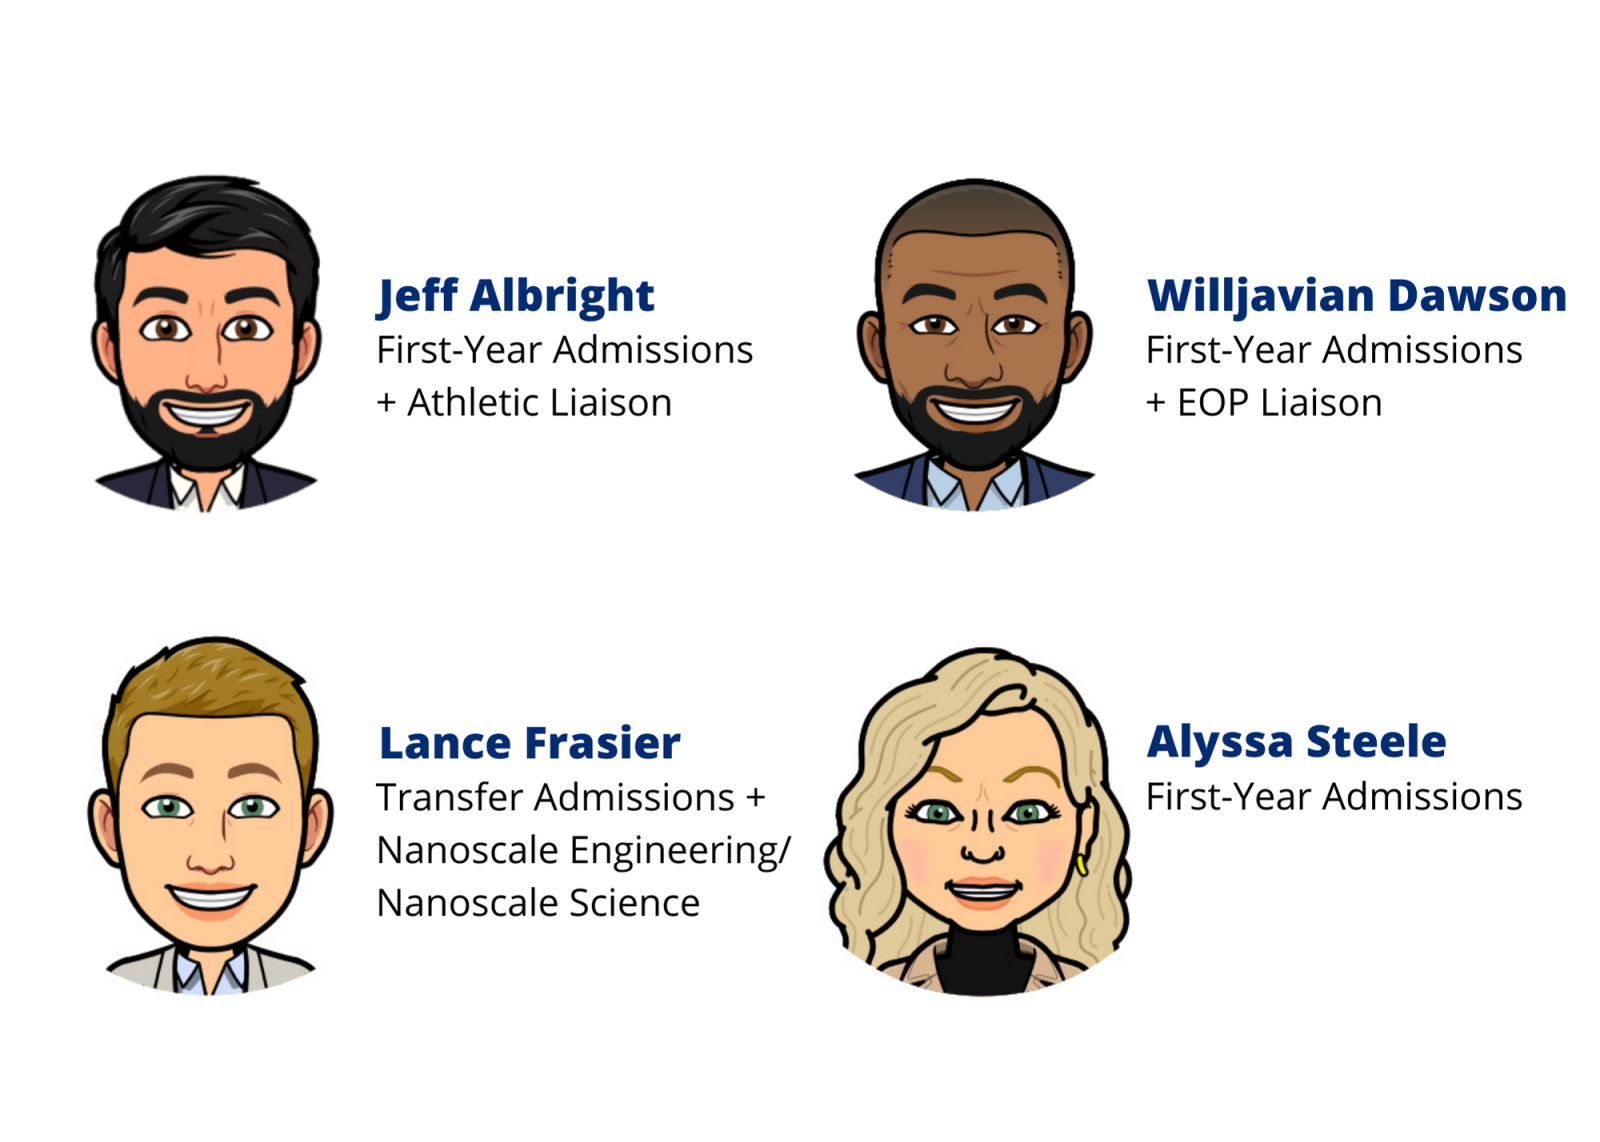 Image of four Admissions Advisors with Names and Titles: Jeff Albright, First-Year Admissions + Athletic Liaison, Willjavian Dawson, First-Year Admissions + EOP Liaison, Lance Frasier, Transfer Admissions + Nanoscale Science/Nanoscale Engineering, and Alyssa Steele, First-Year Admissions